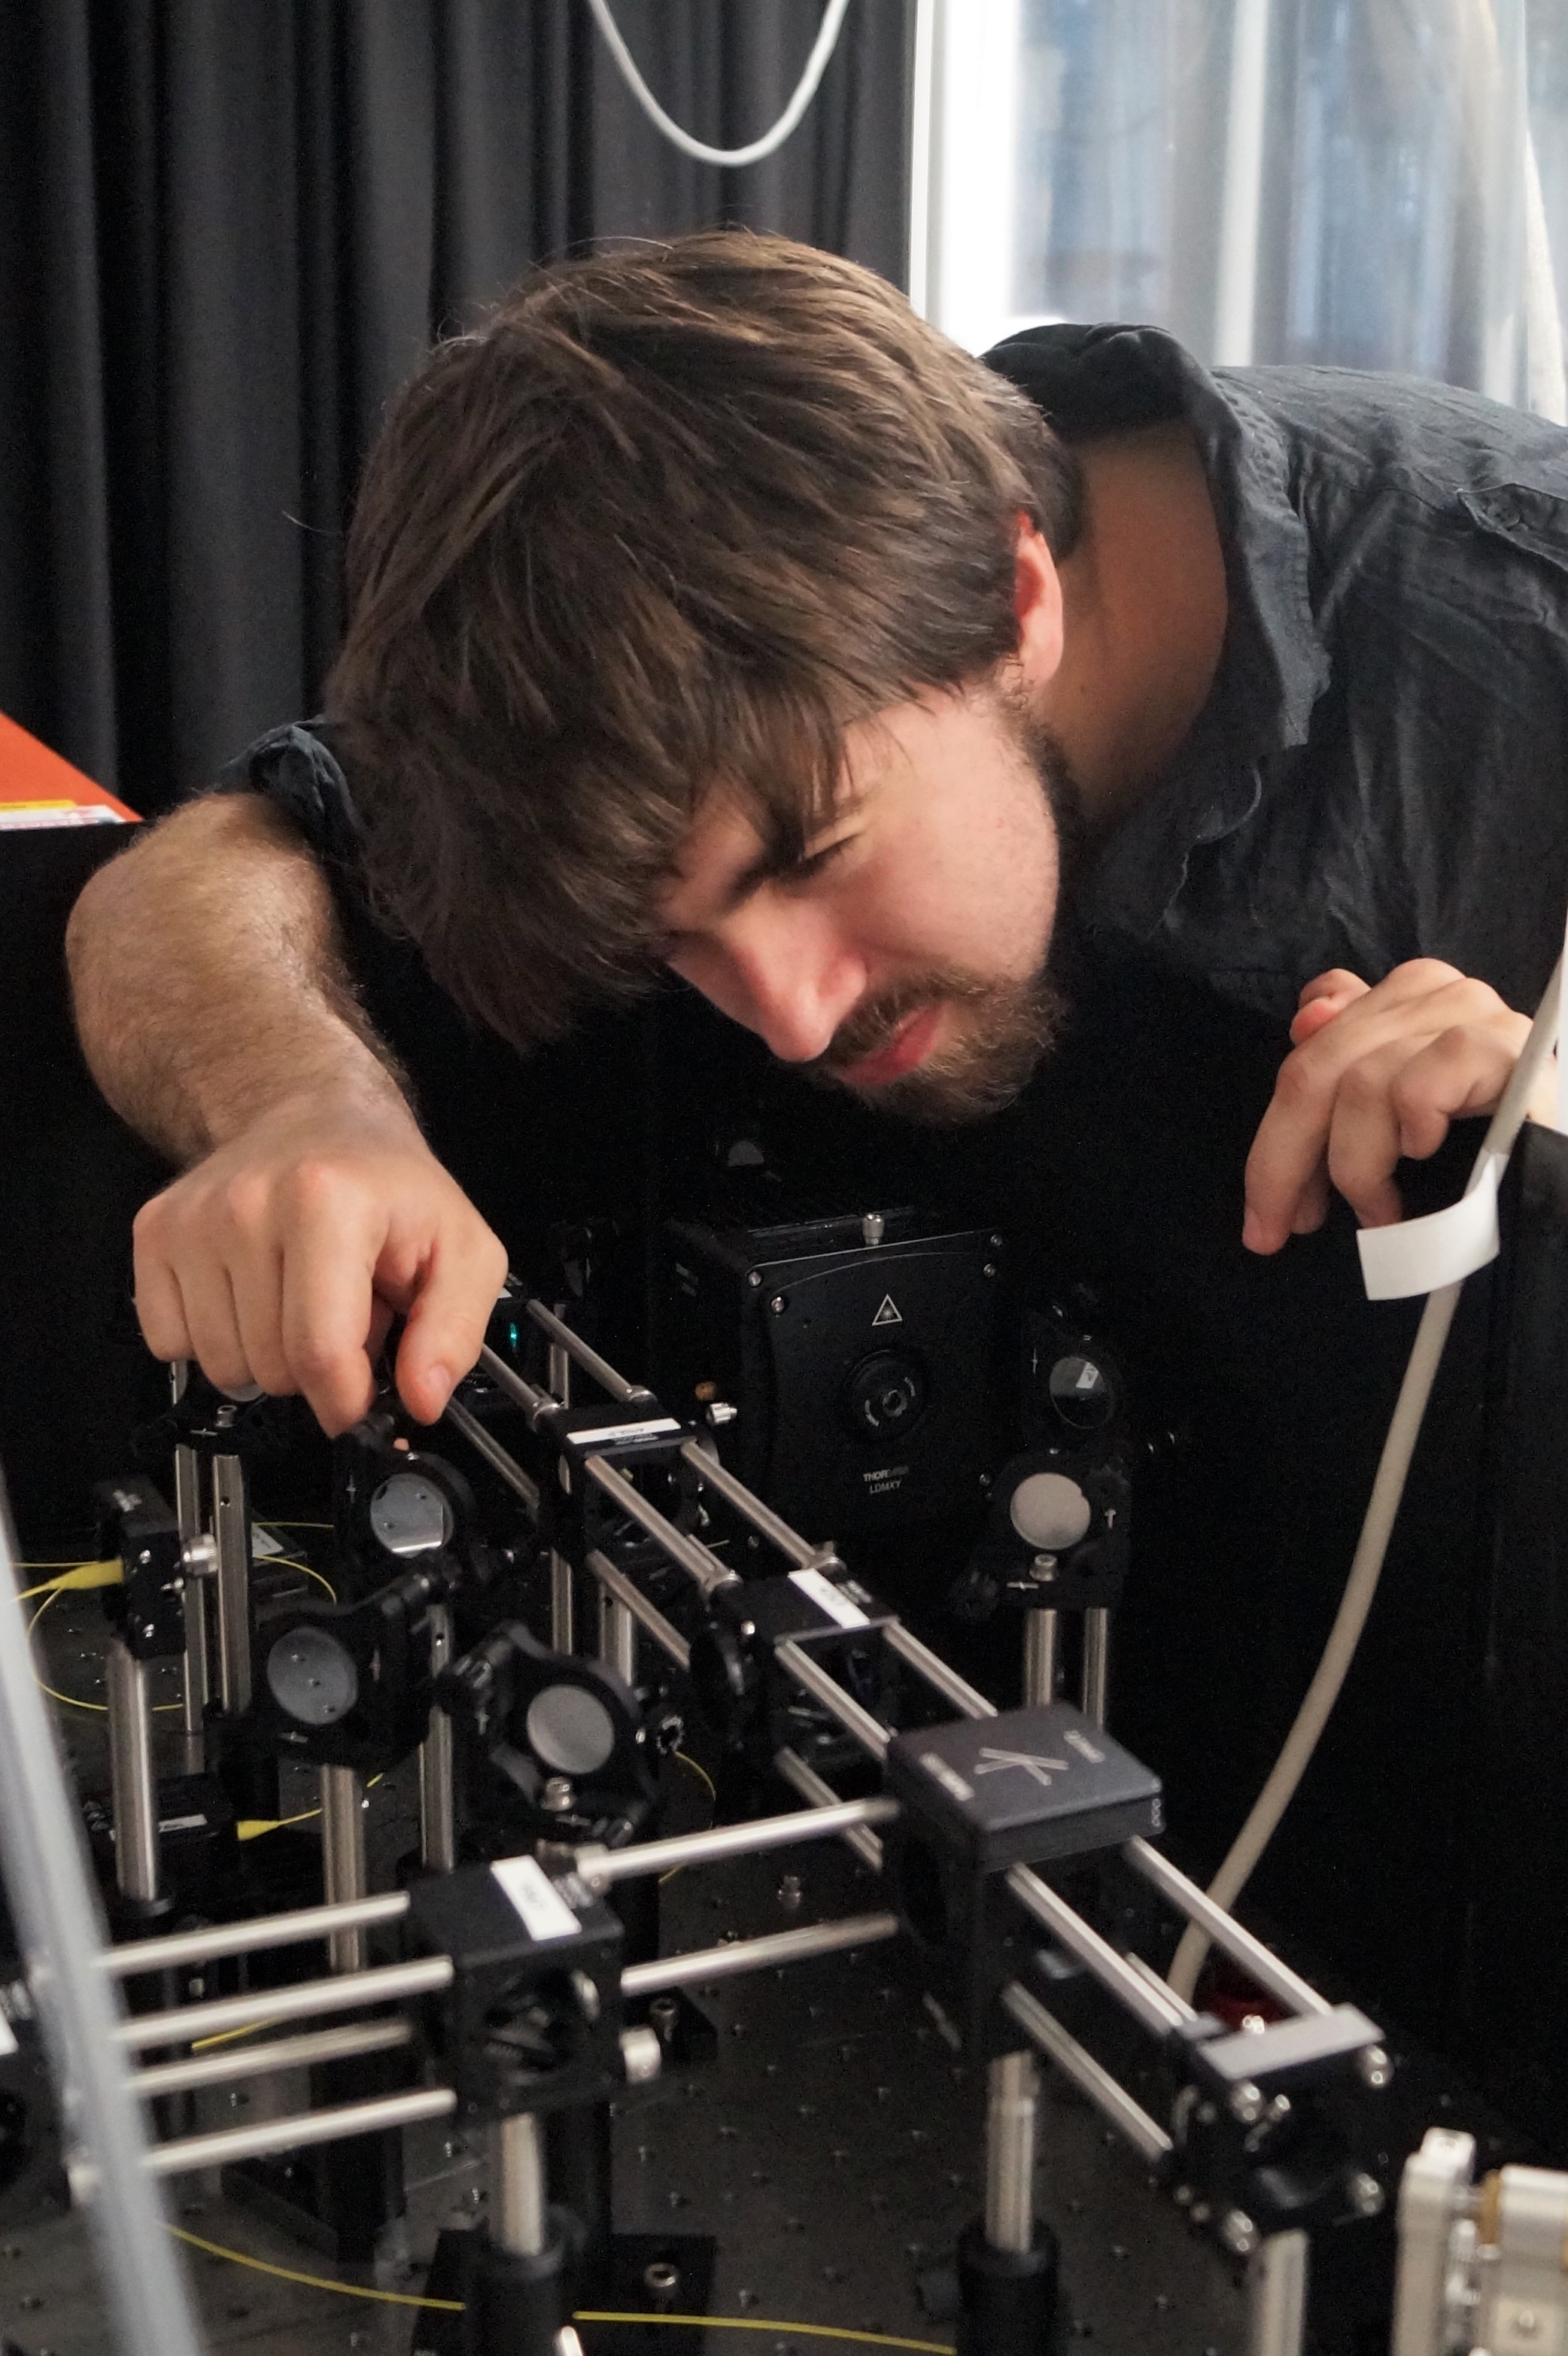 Dr. Tom Folland (Postdoctoral Fellow). Joined the Caldwell Lab at the very beginning, was critical to getting the lab setup and initial results getting accumulated. He comes to us from University of Manchester in the UK, where he did his PhD work on THz quantum cascade lasers.